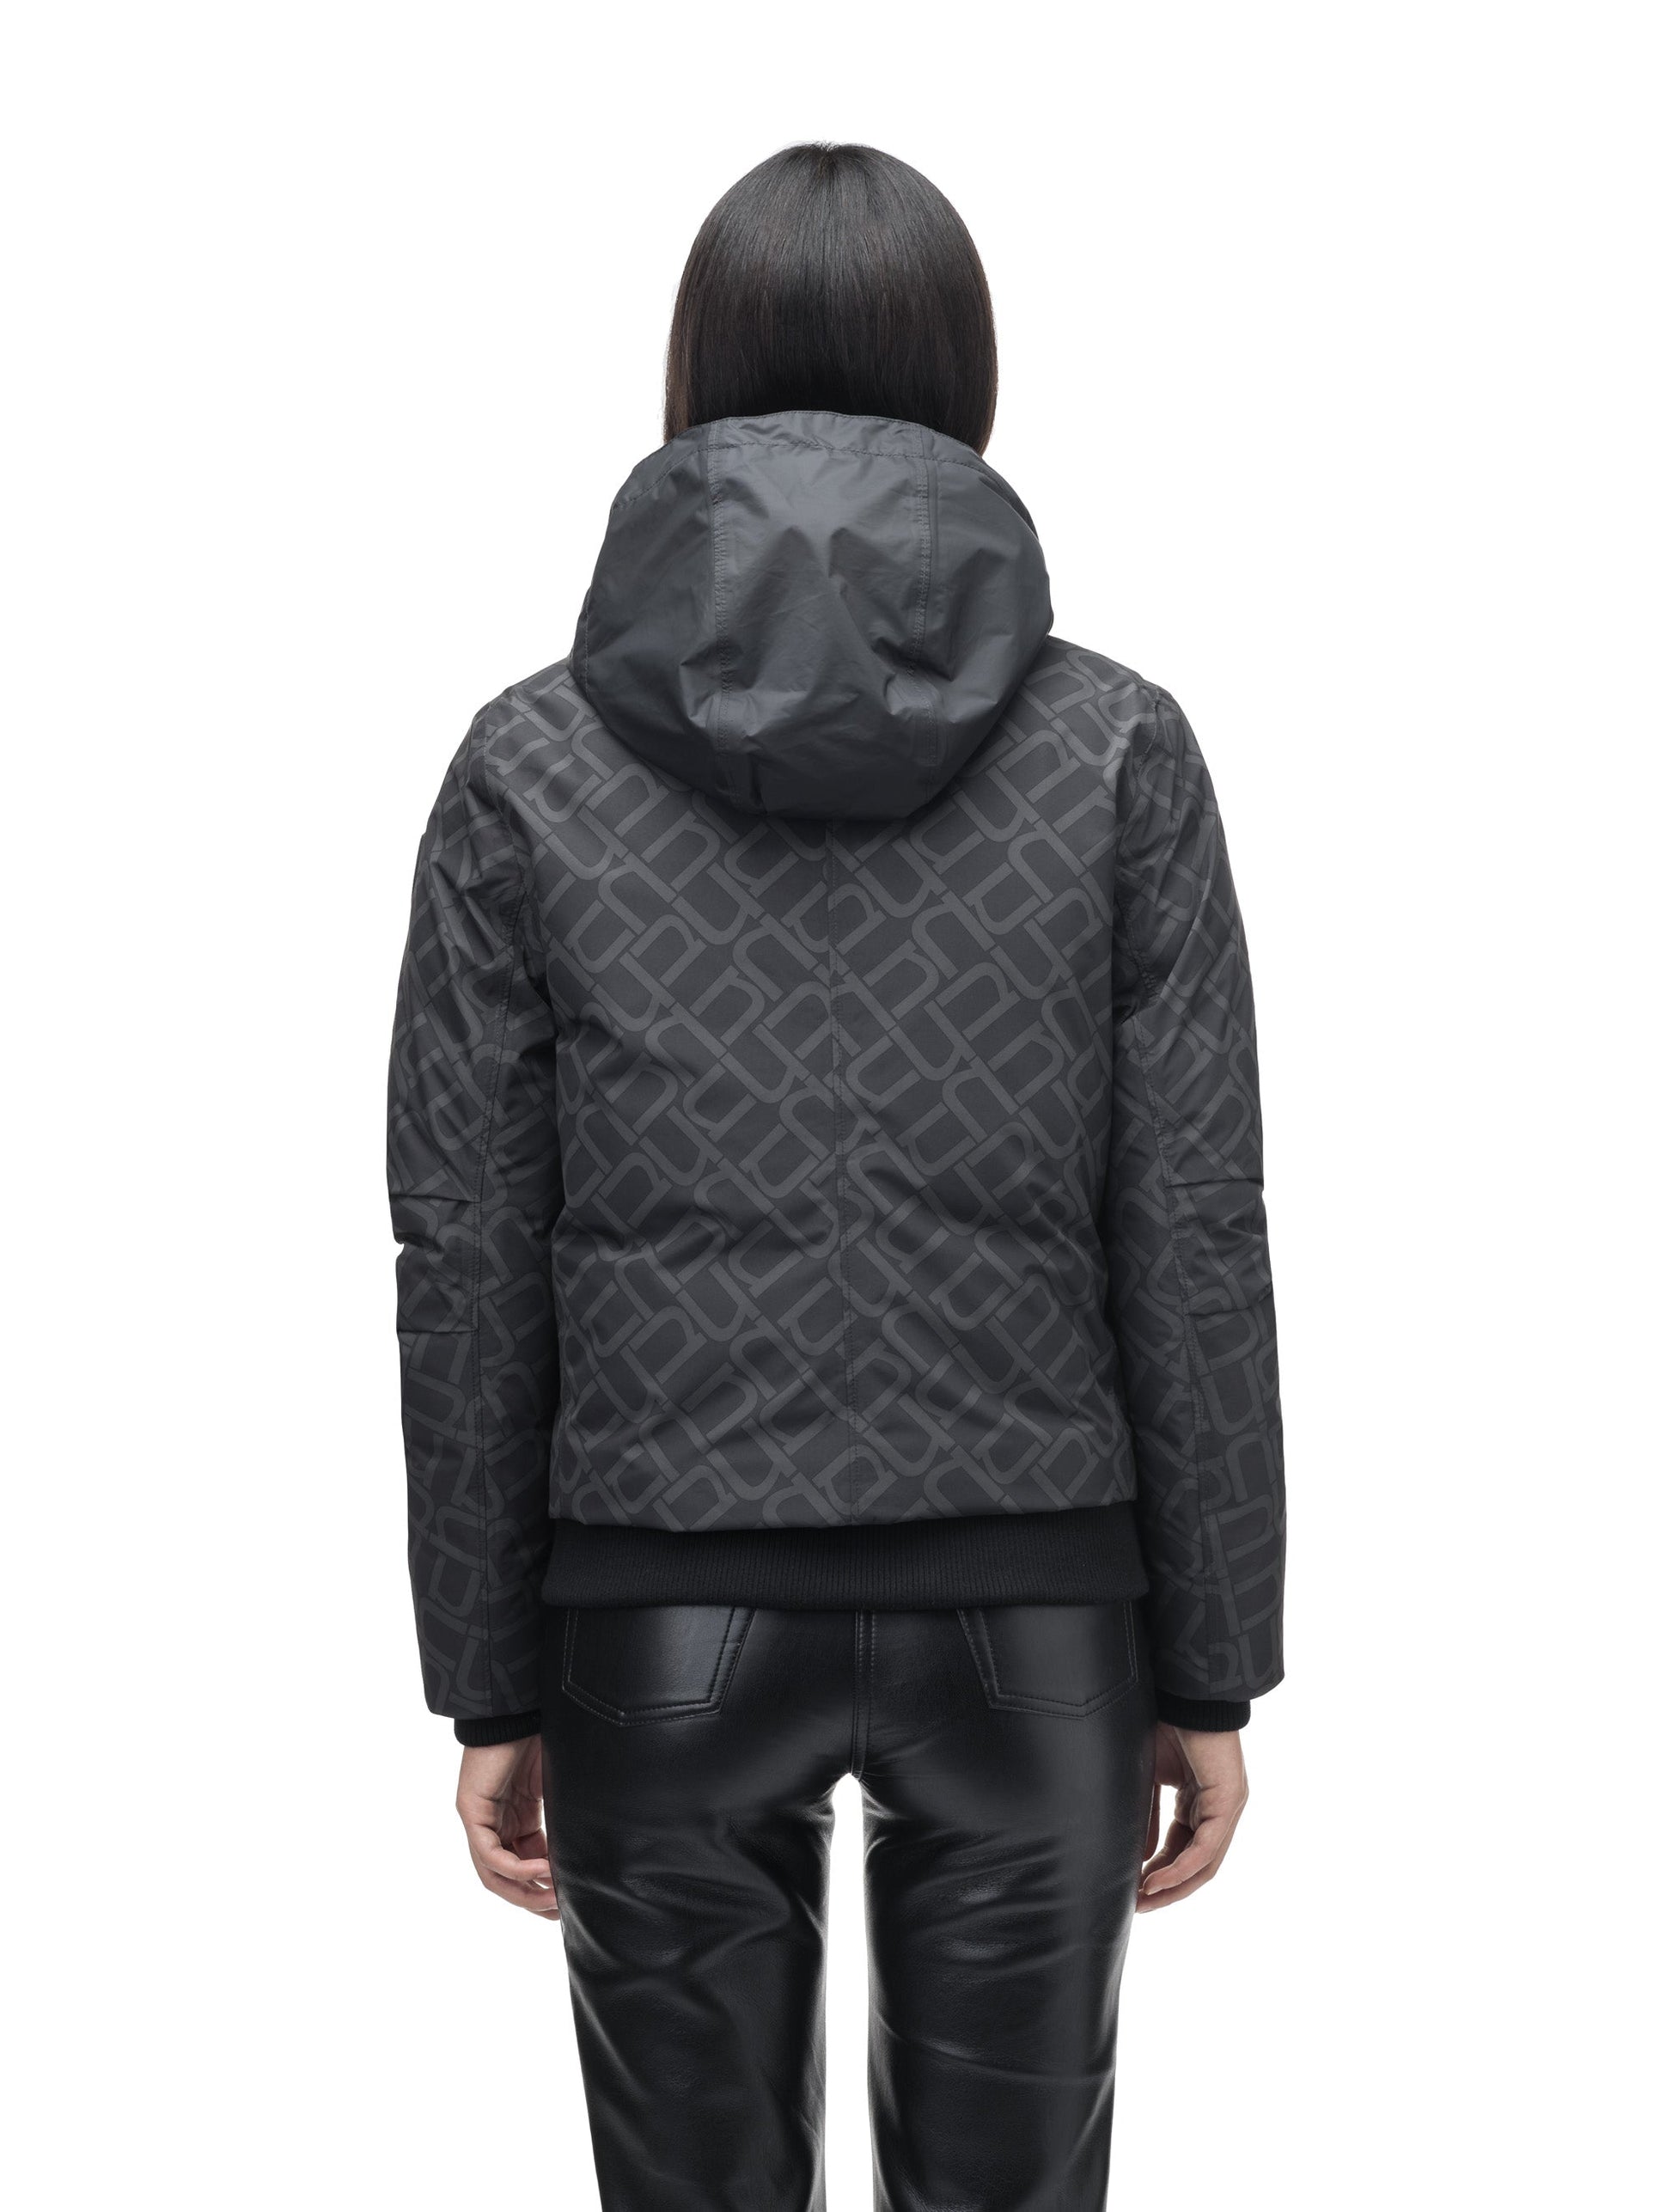 Rae Ladies Aviator Jacket in hip length, Canadian duck down insulation, removable shearling collar with hidden tuckable hood, and two-way front zipper, in Dark Monogram